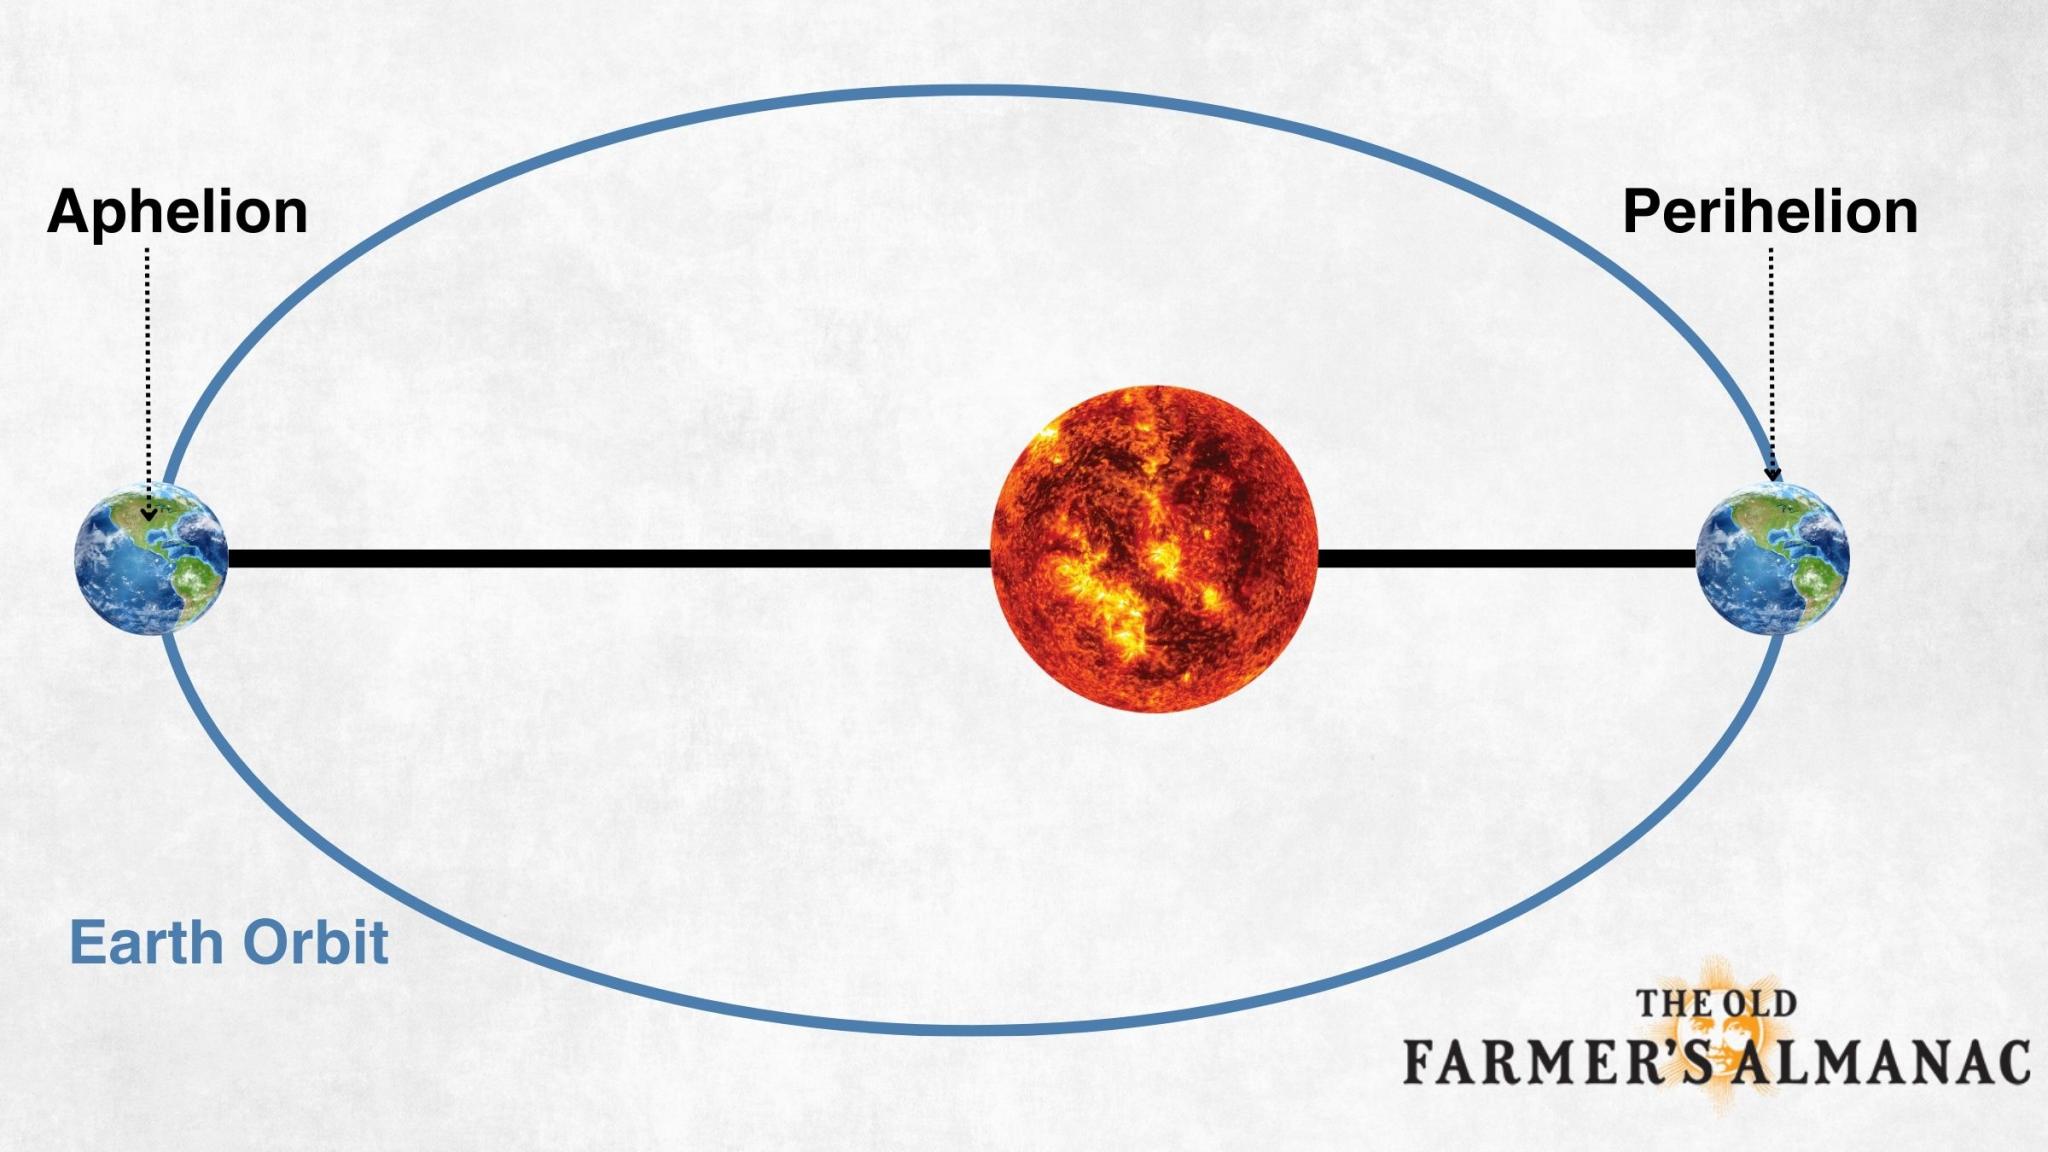 the position of the earth and the sun at Aphelion and Perihelion